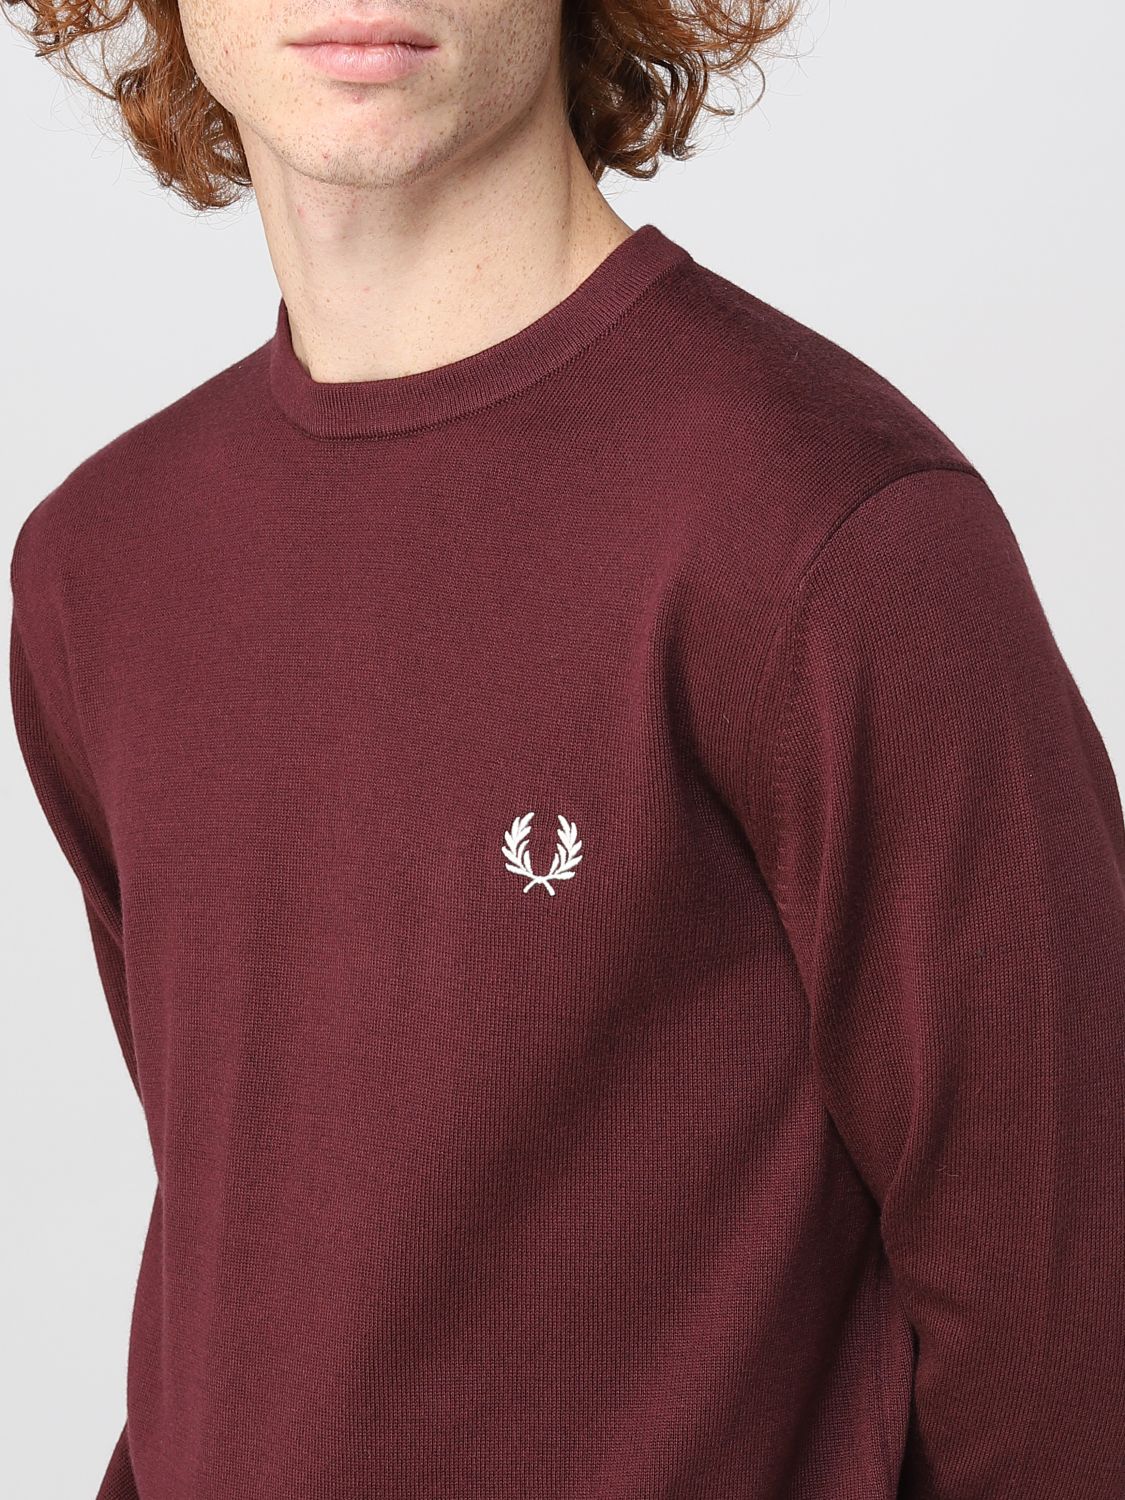 Jumper Fred Perry: Fred Perry jumper for men burgundy 3